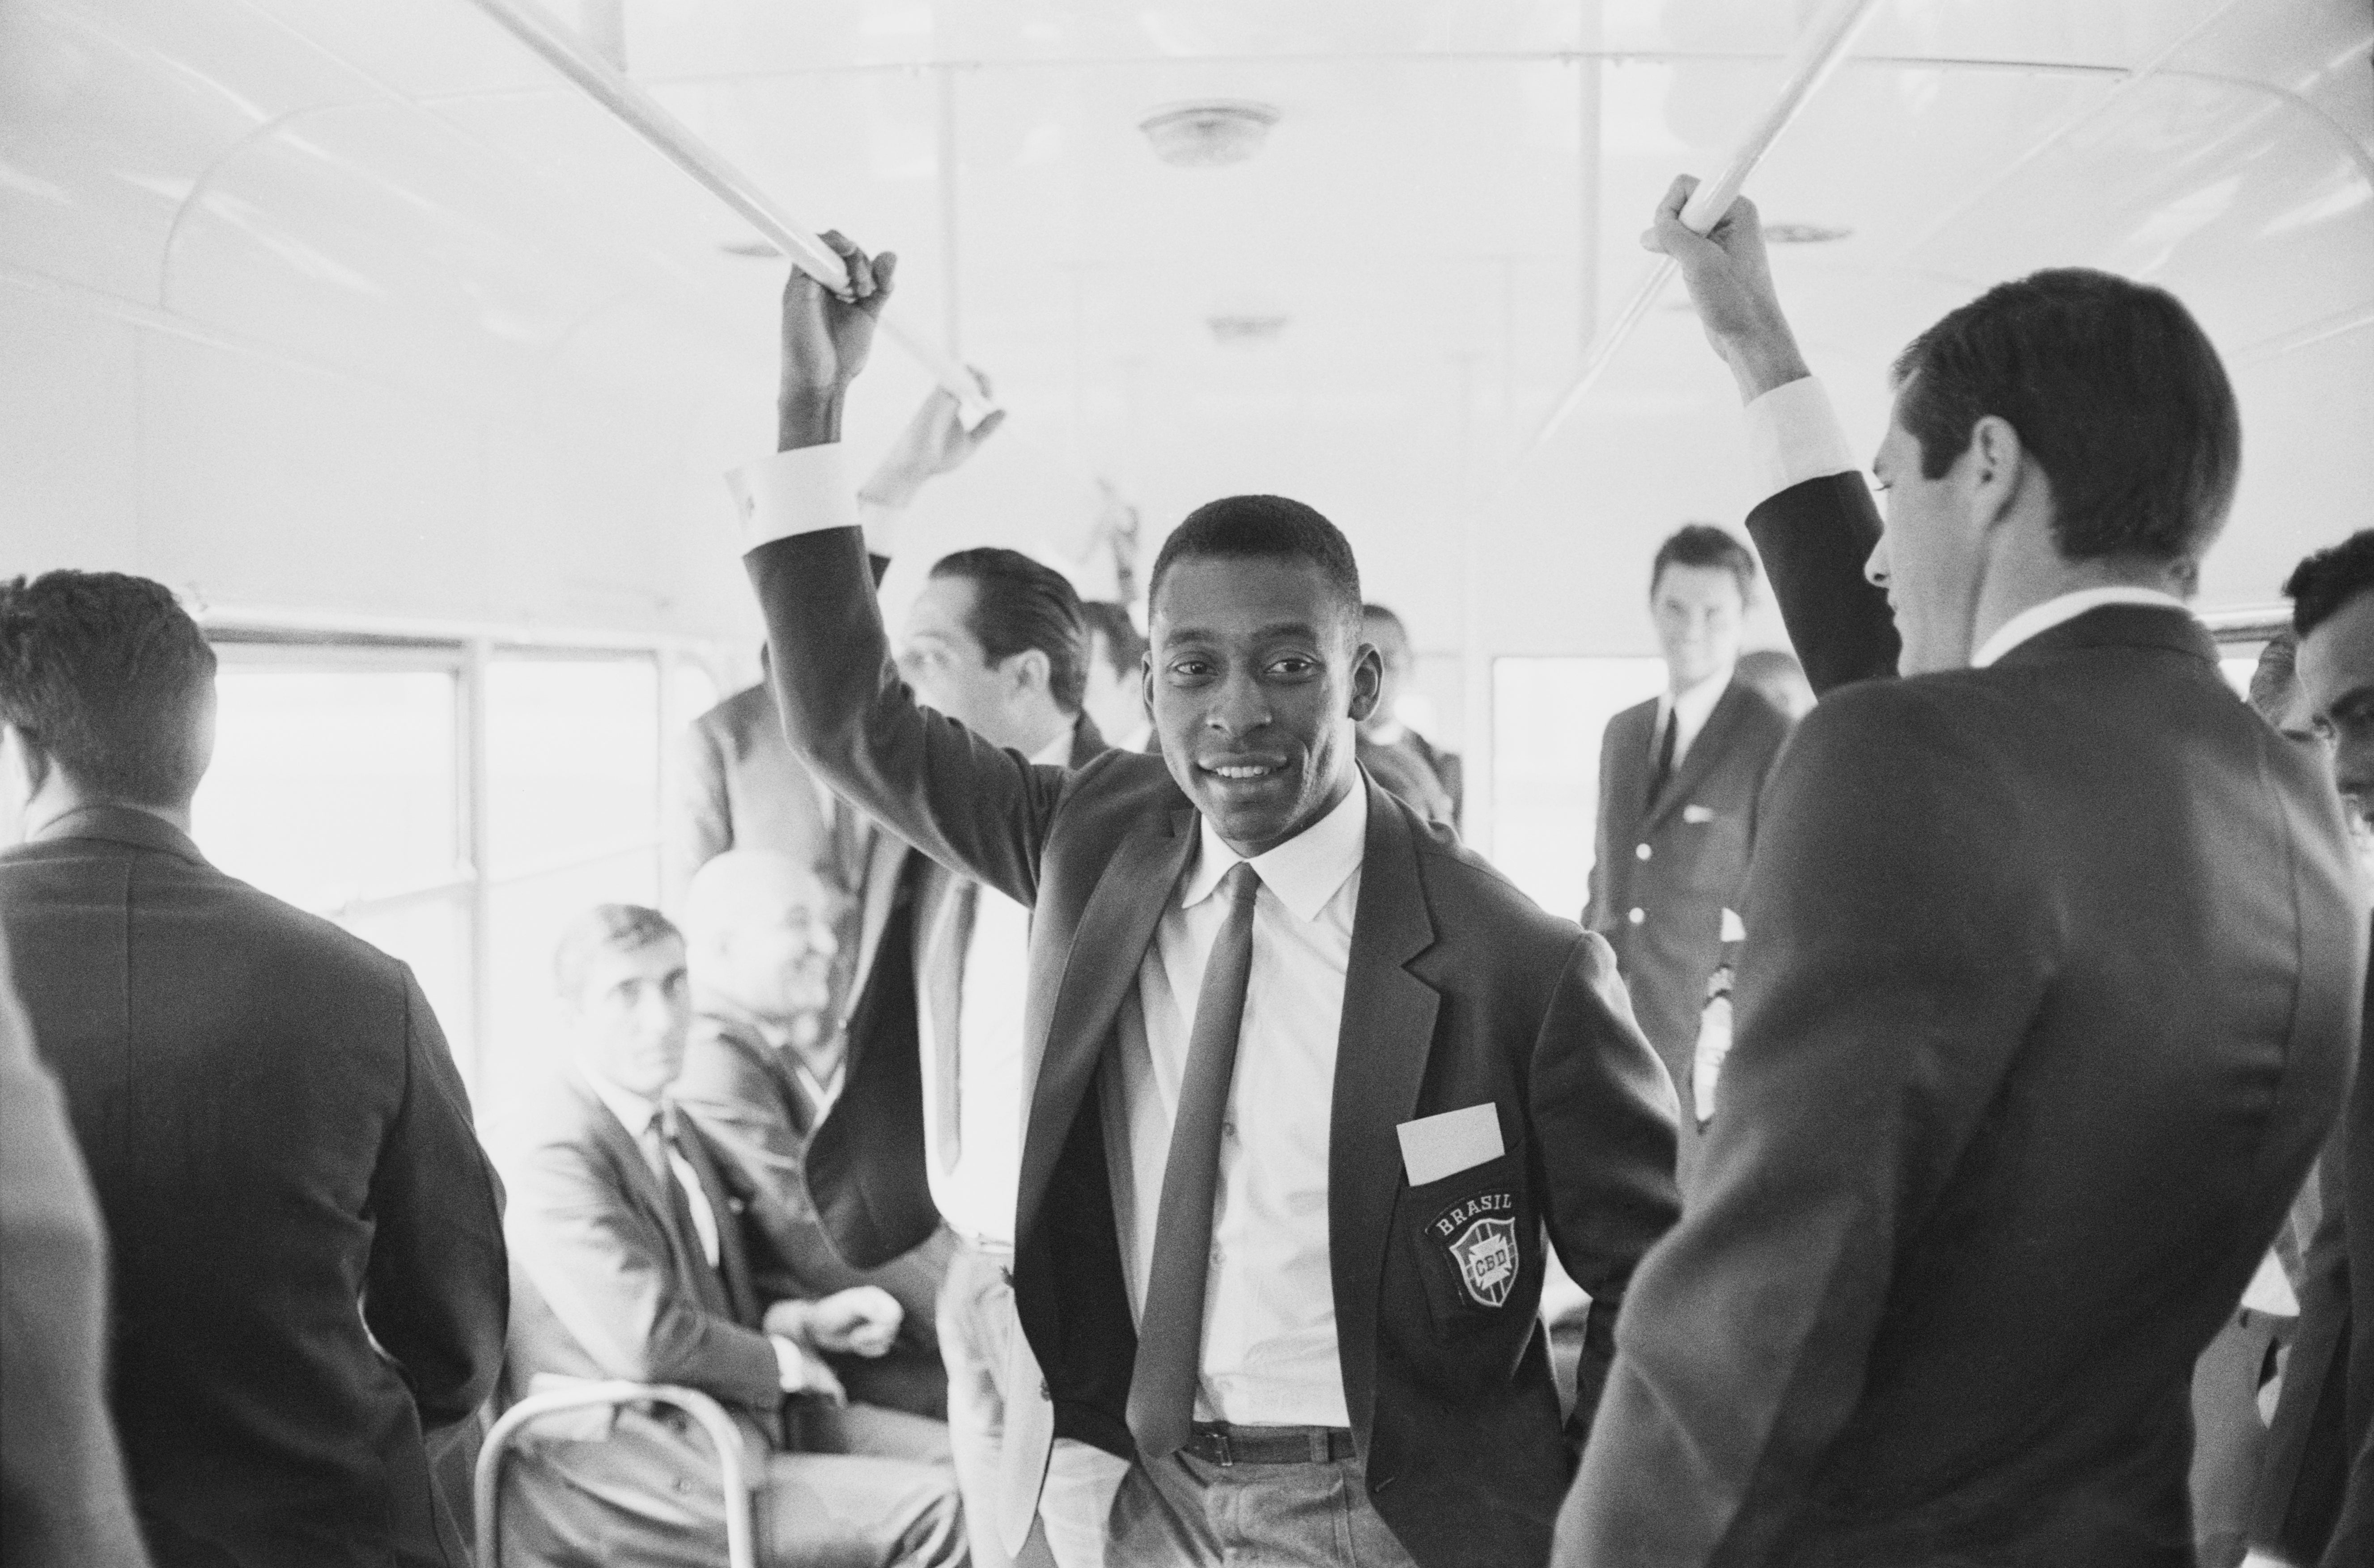 Pele and Brazil arrived for the 1966 World Cup in high spirits